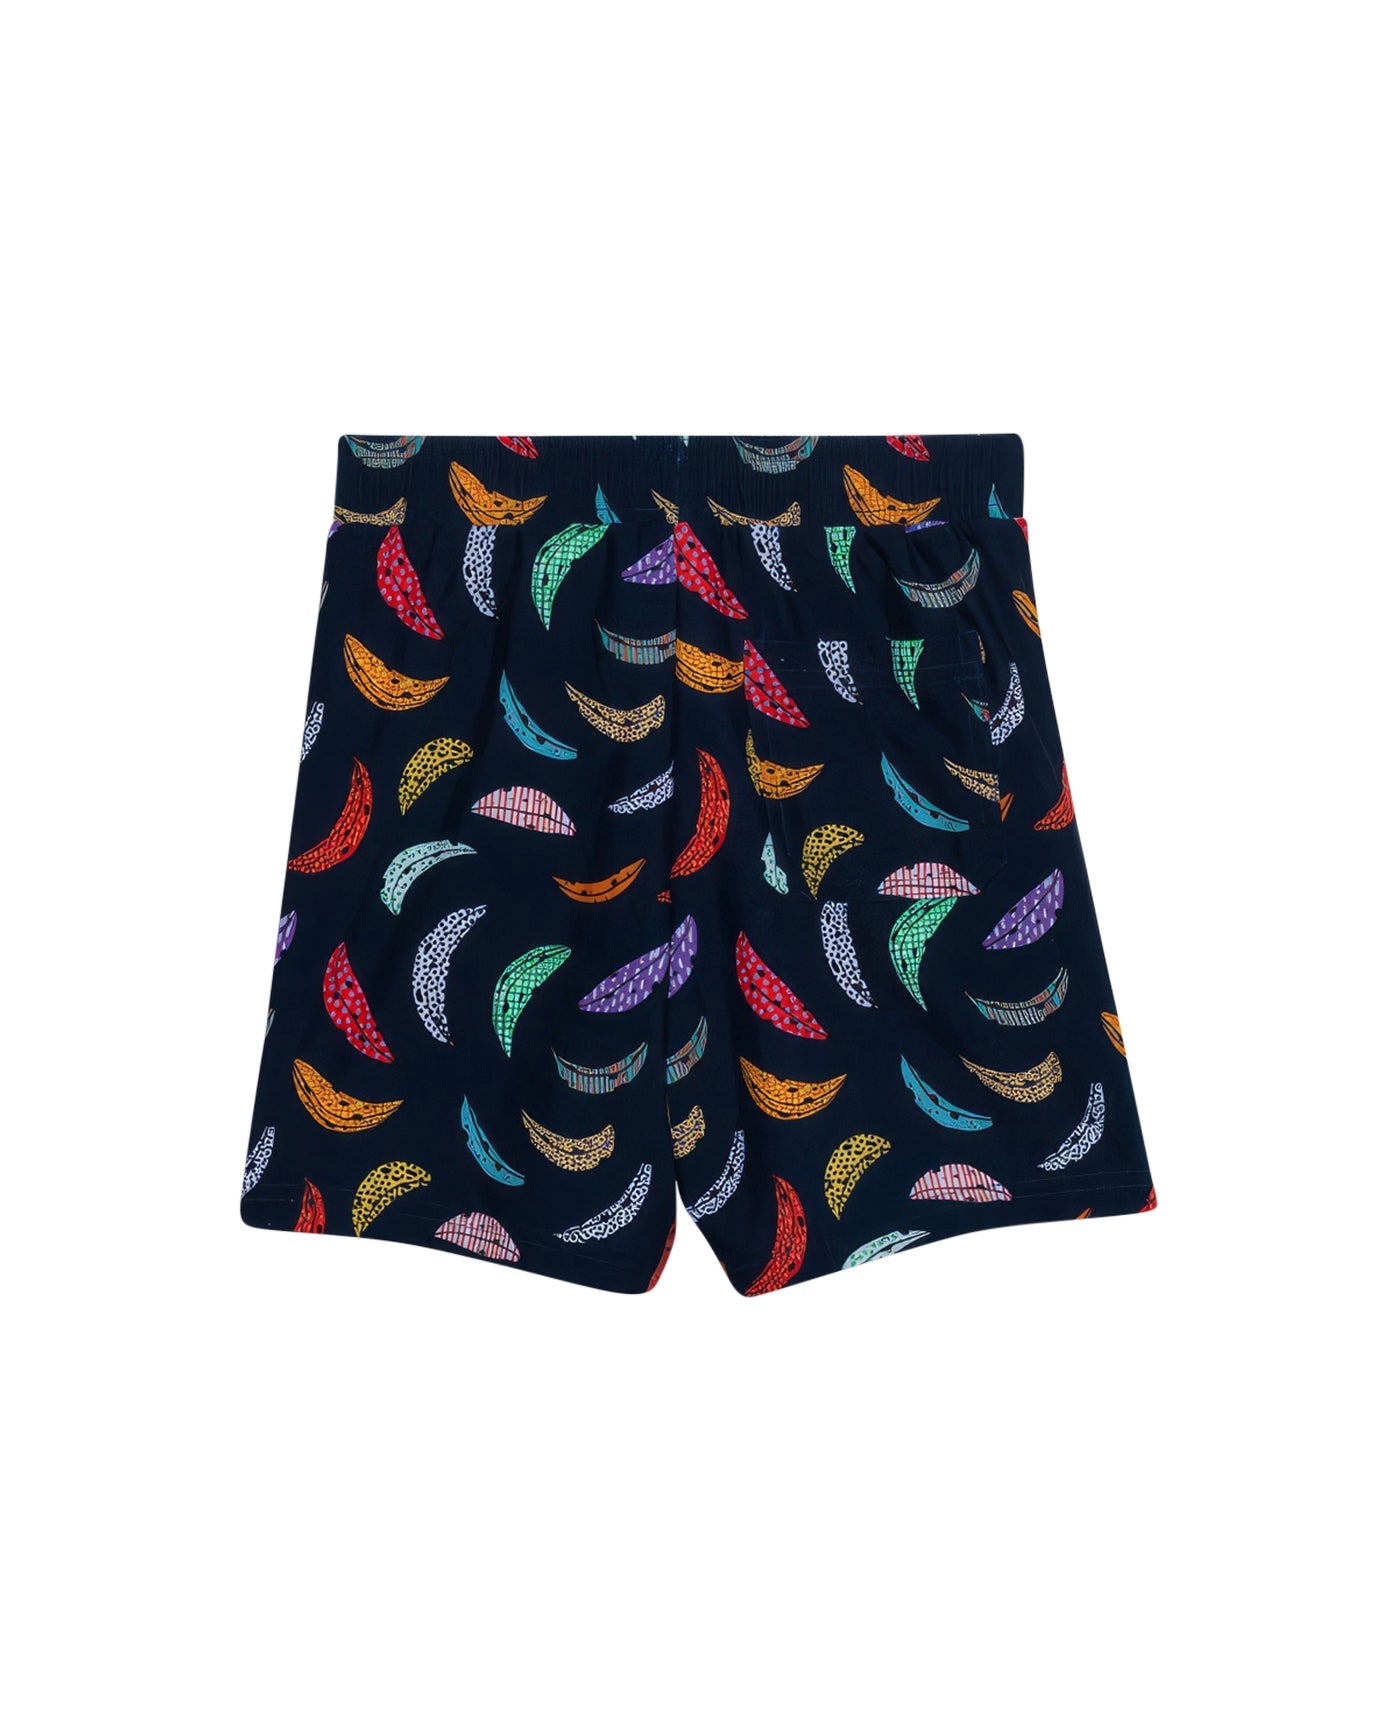 Back View Of Gottex Kids Graphic Swim Trunks | GOTTEX KIDS GRAPHIC BLUE FEATHERS